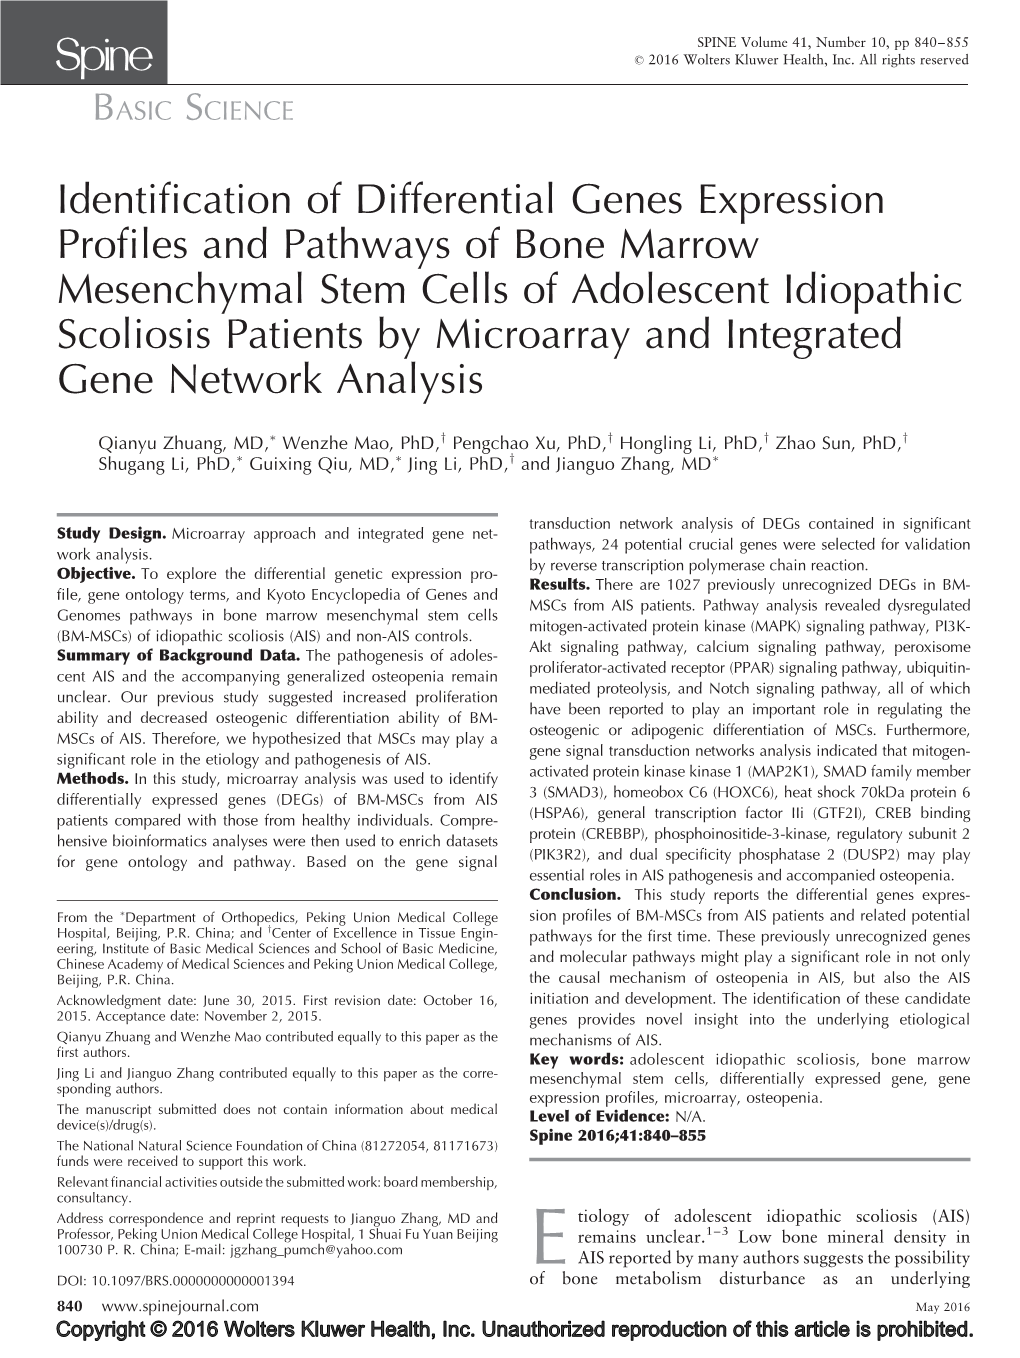 Identification of Differential Genes Expression Profiles and Pathways of Bone Marrow Mesenchymal Stem Cells of Adolescent Idiopa